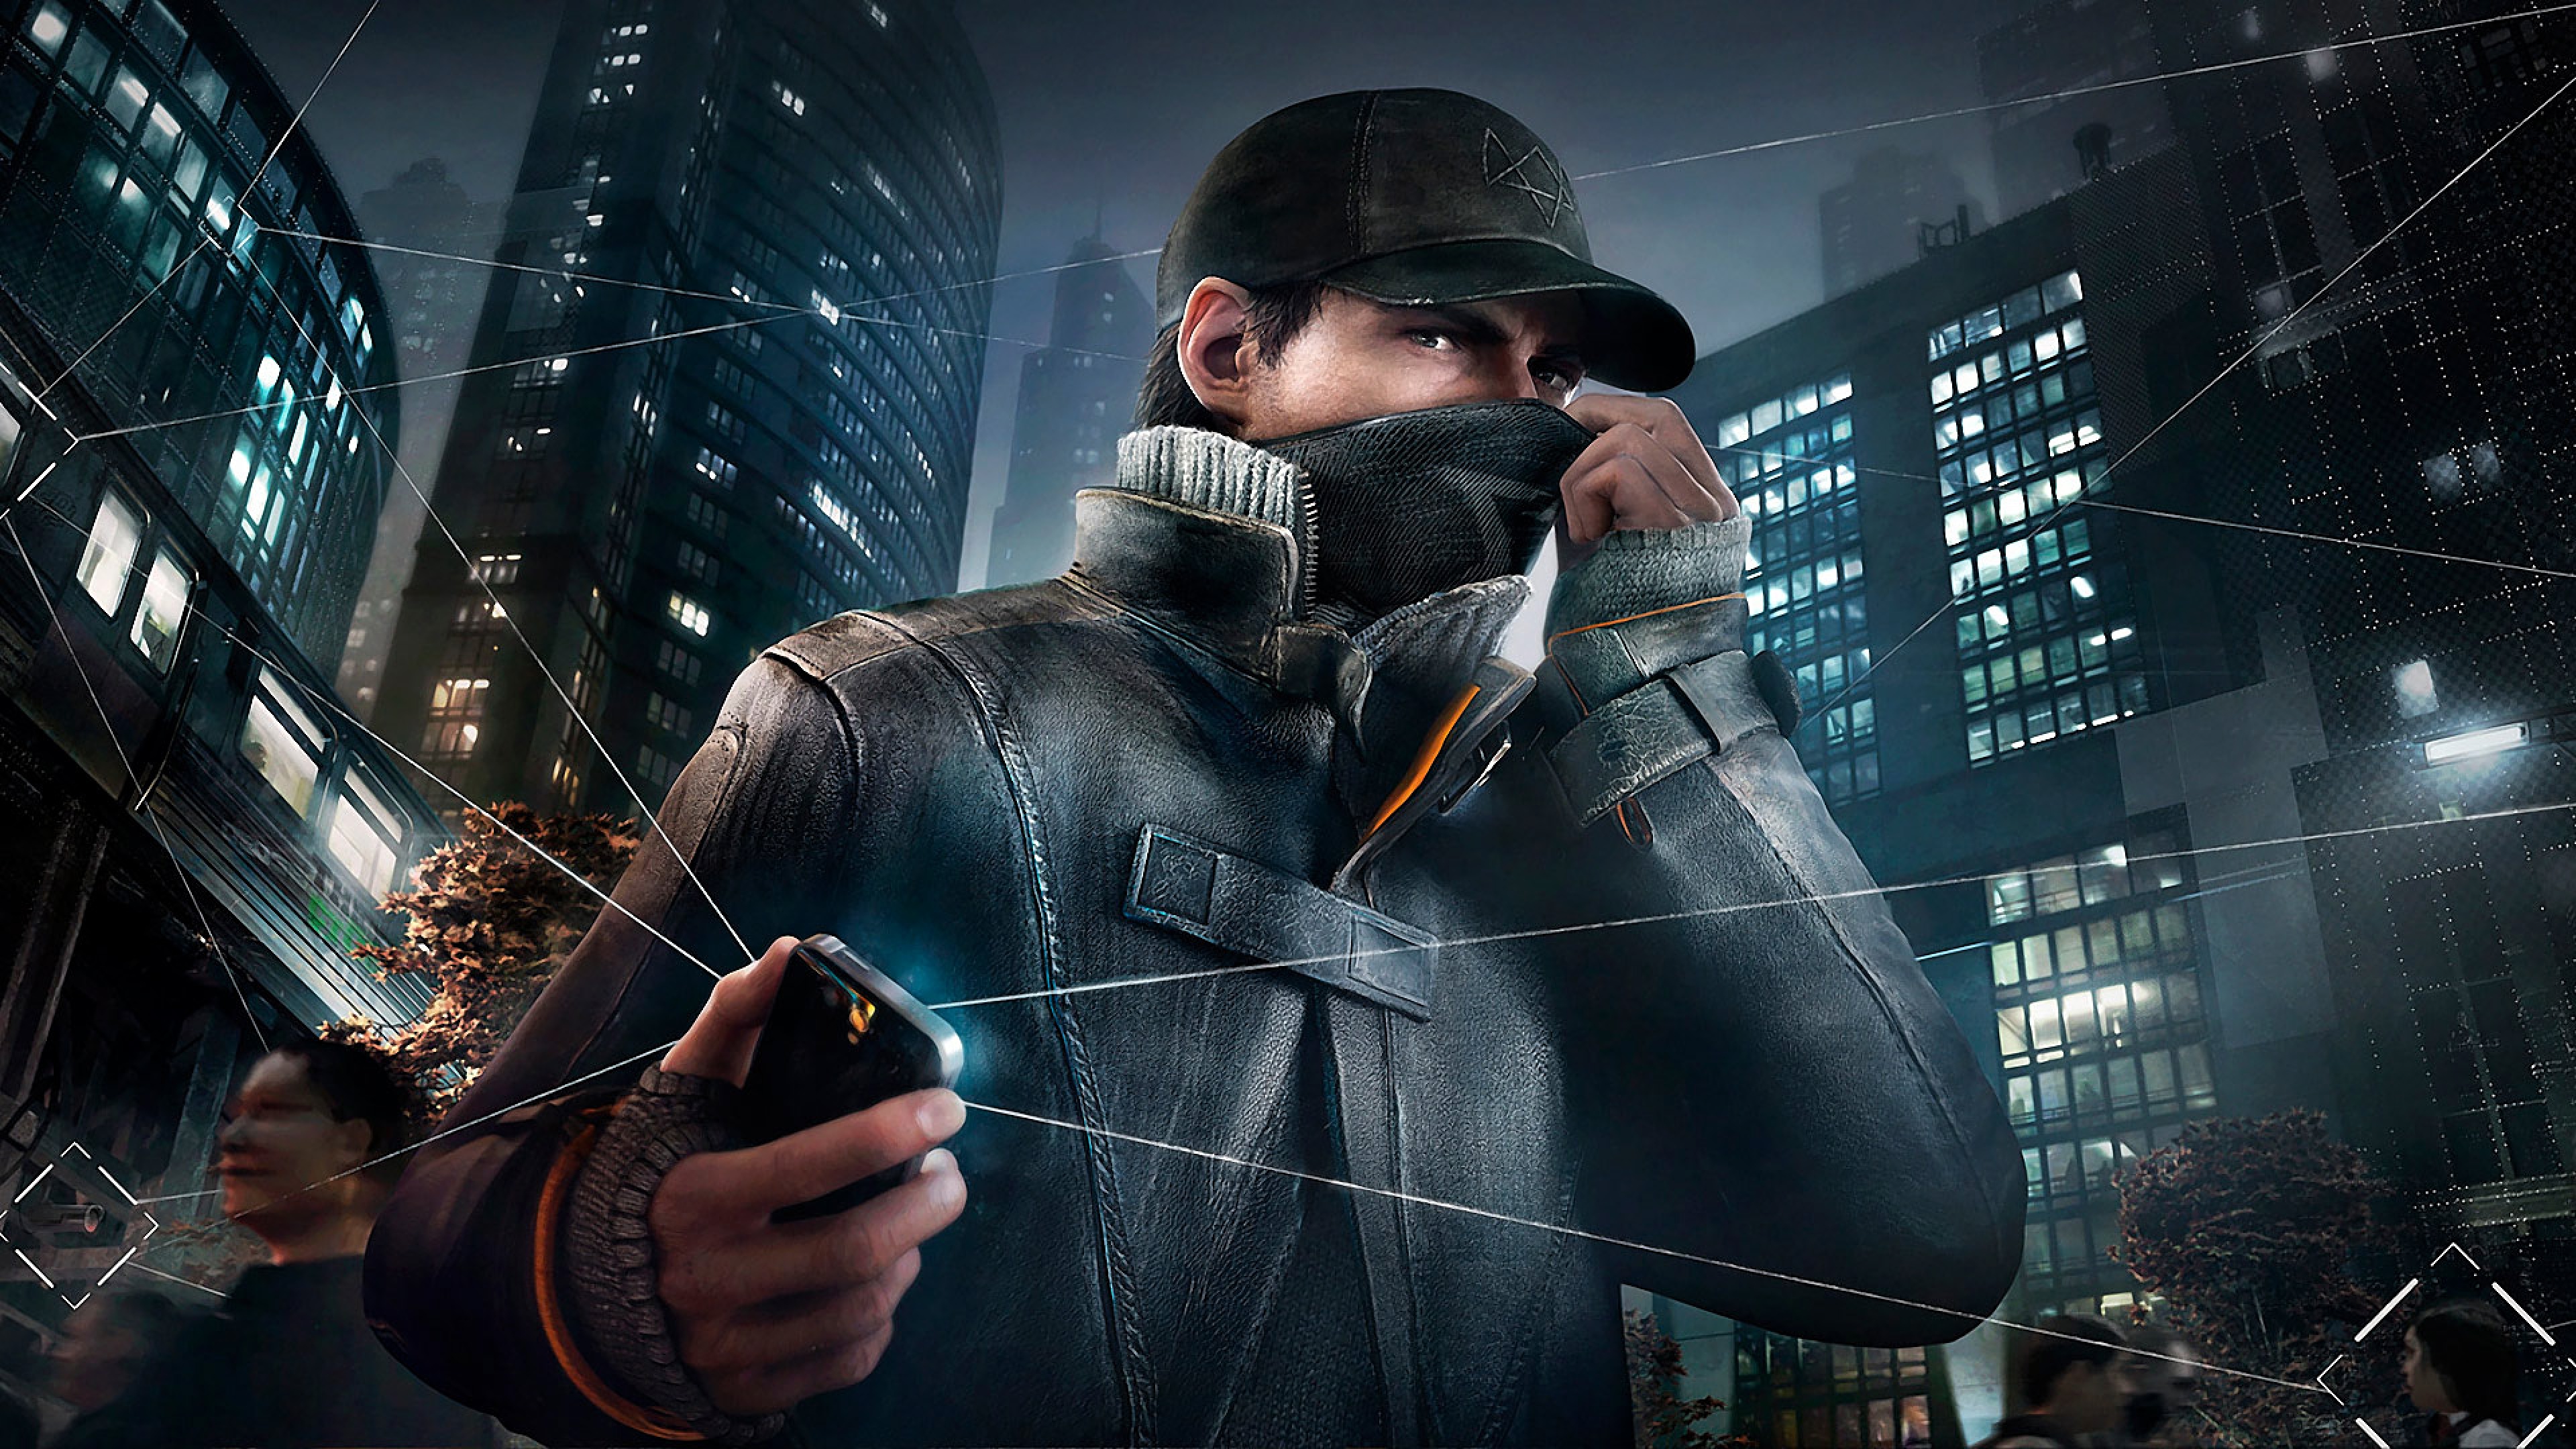  Watch dogs Aiden pearce Game 2014 Wallpaper Background 4K Ultra HD 3840x2160